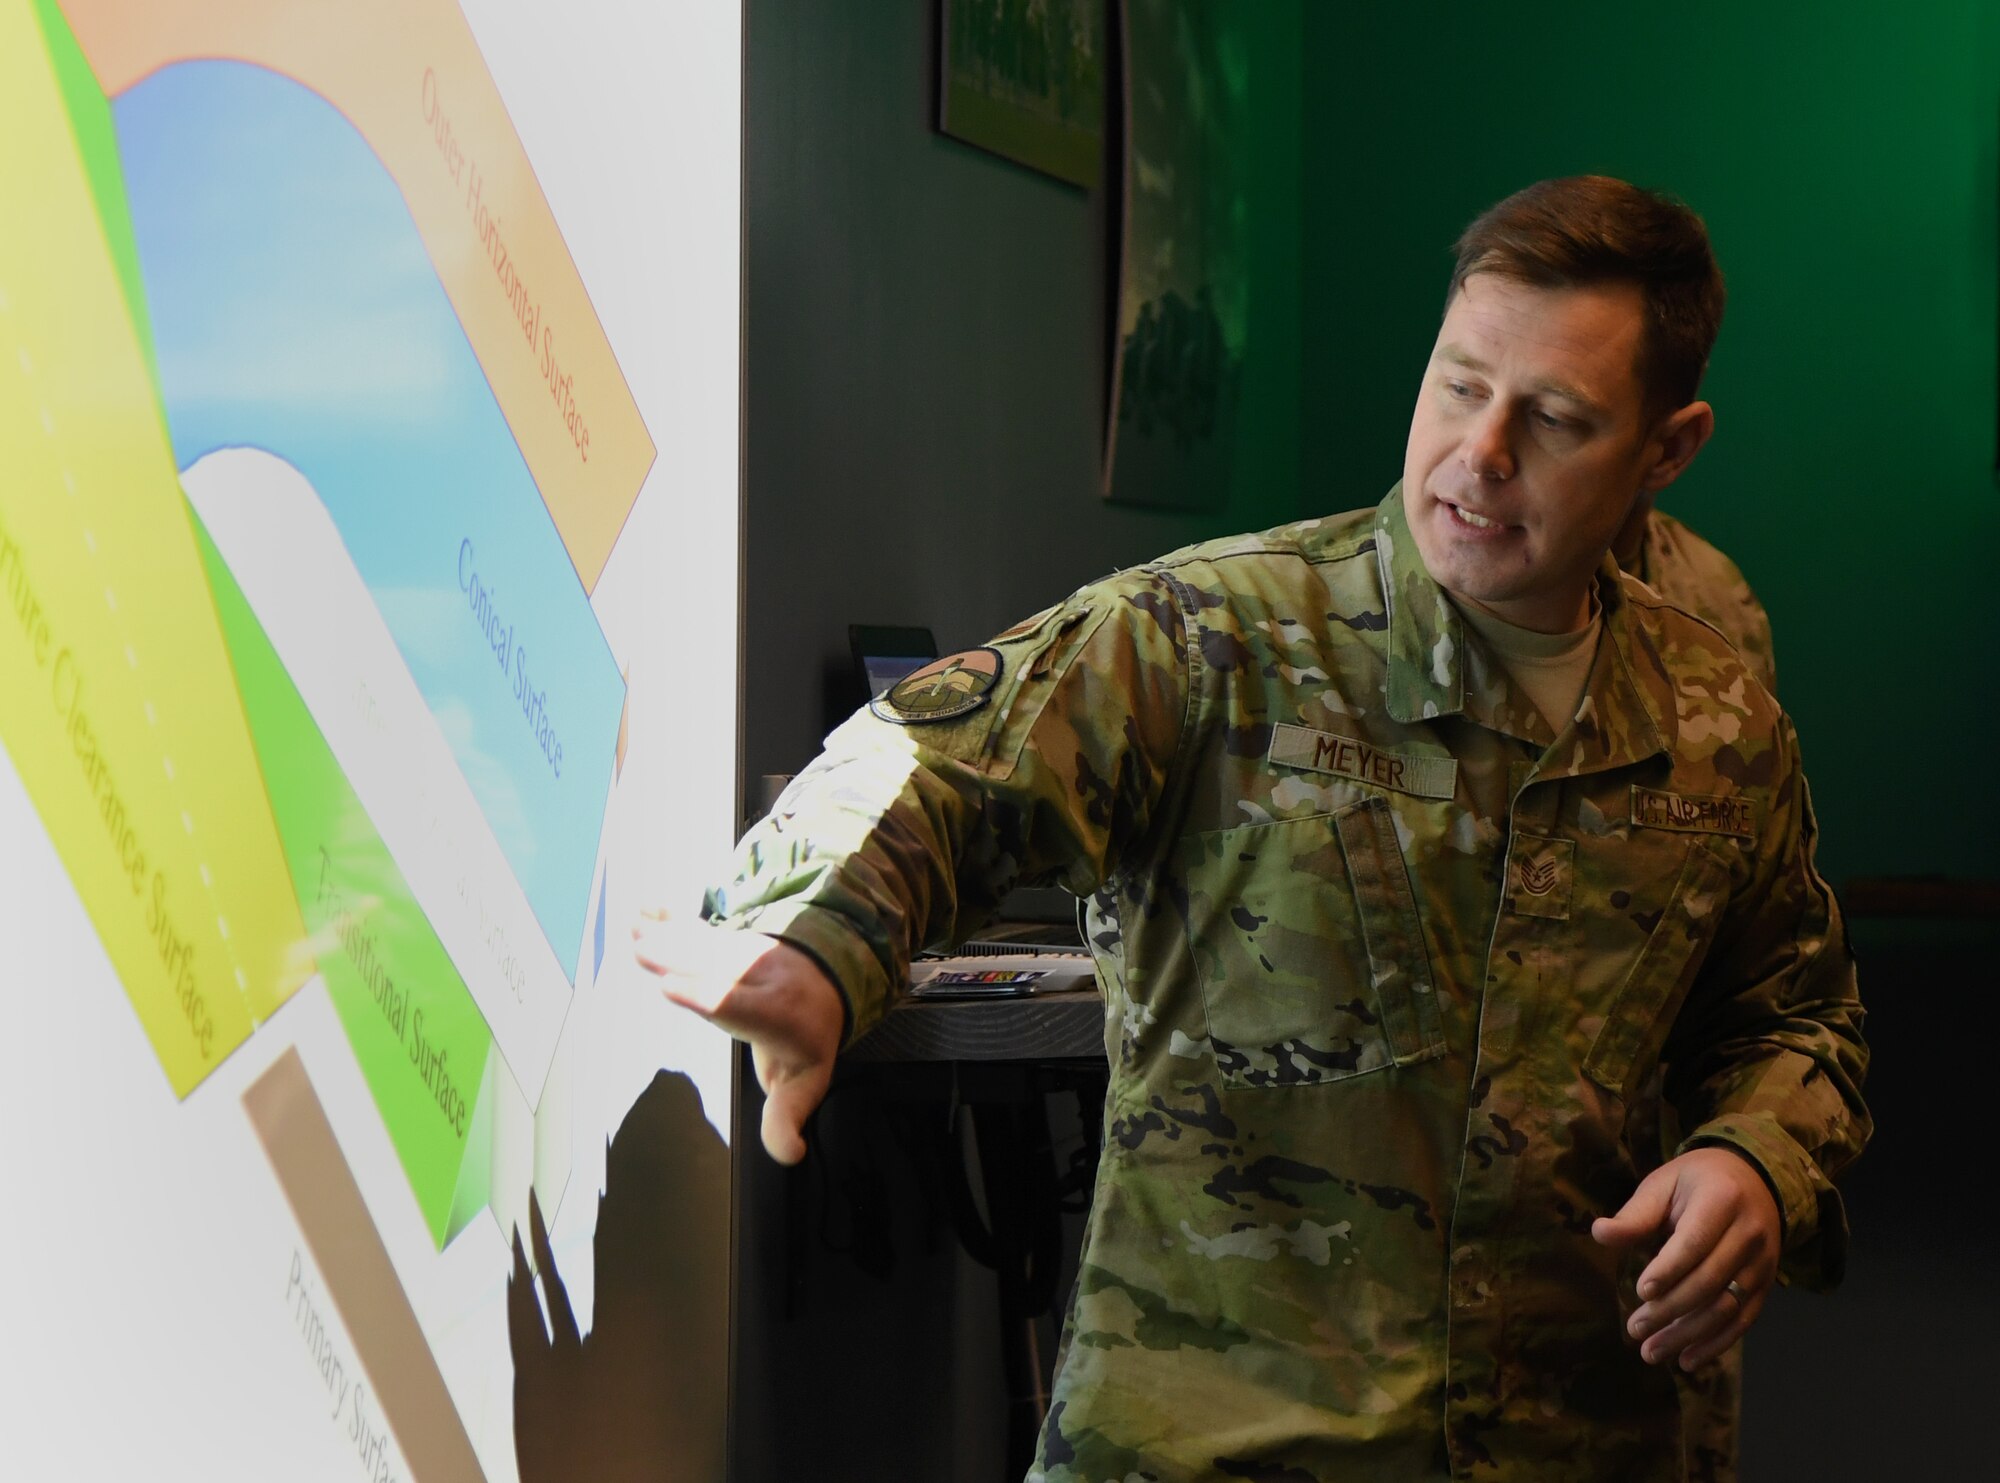 U.S. Air Force Tech. Sgt. Andrew Meyer, 334th Training Squadron instructor, briefs a slide on imaginary surfaces during the airspace sustainability tour inside Cody Hall at Keesler Air Force Base, Mississippi, Jan. 23, 2019. Keesler hosted the community engagement for civic leaders to discuss Keesler's flying mission requirements in order to create processes which informs key decision makers regarding local development and to ensure compatible economic growth for the surrounding communities. (U.S. Air Force photo by Kemberly Groue)